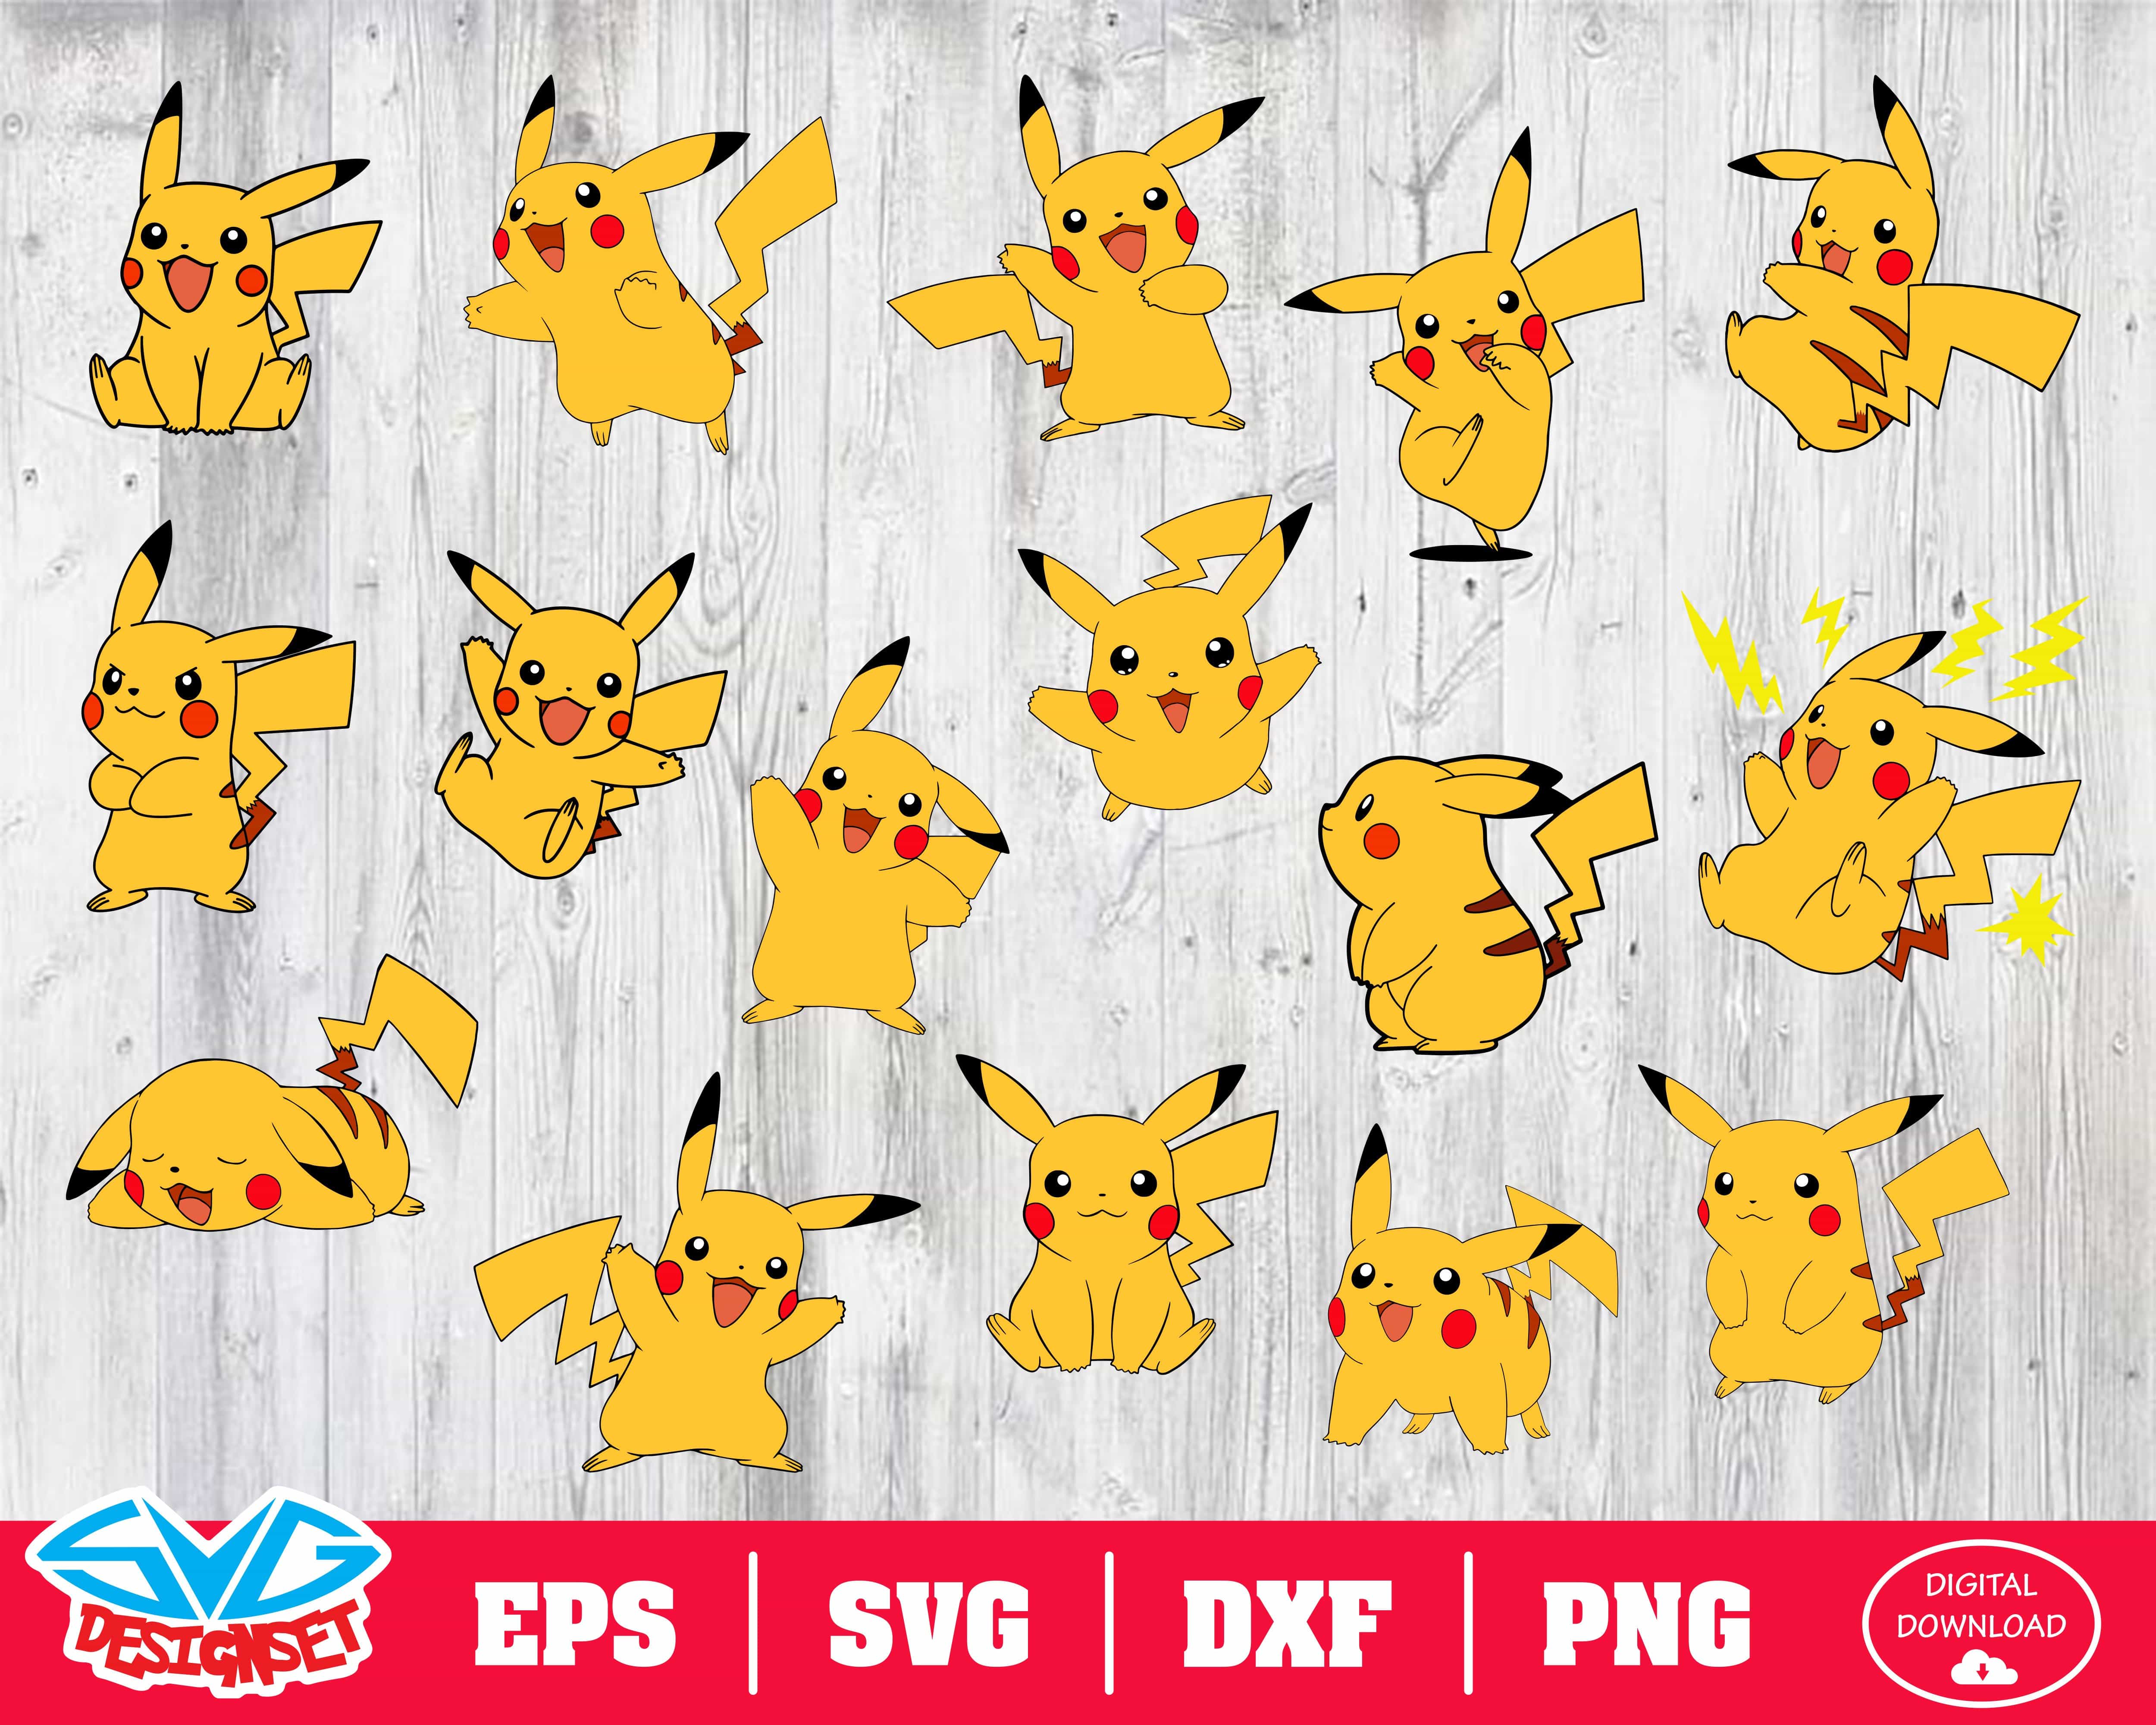 Pikachu Svg Dxf Eps Png Clipart Silhouette And Cutfiles